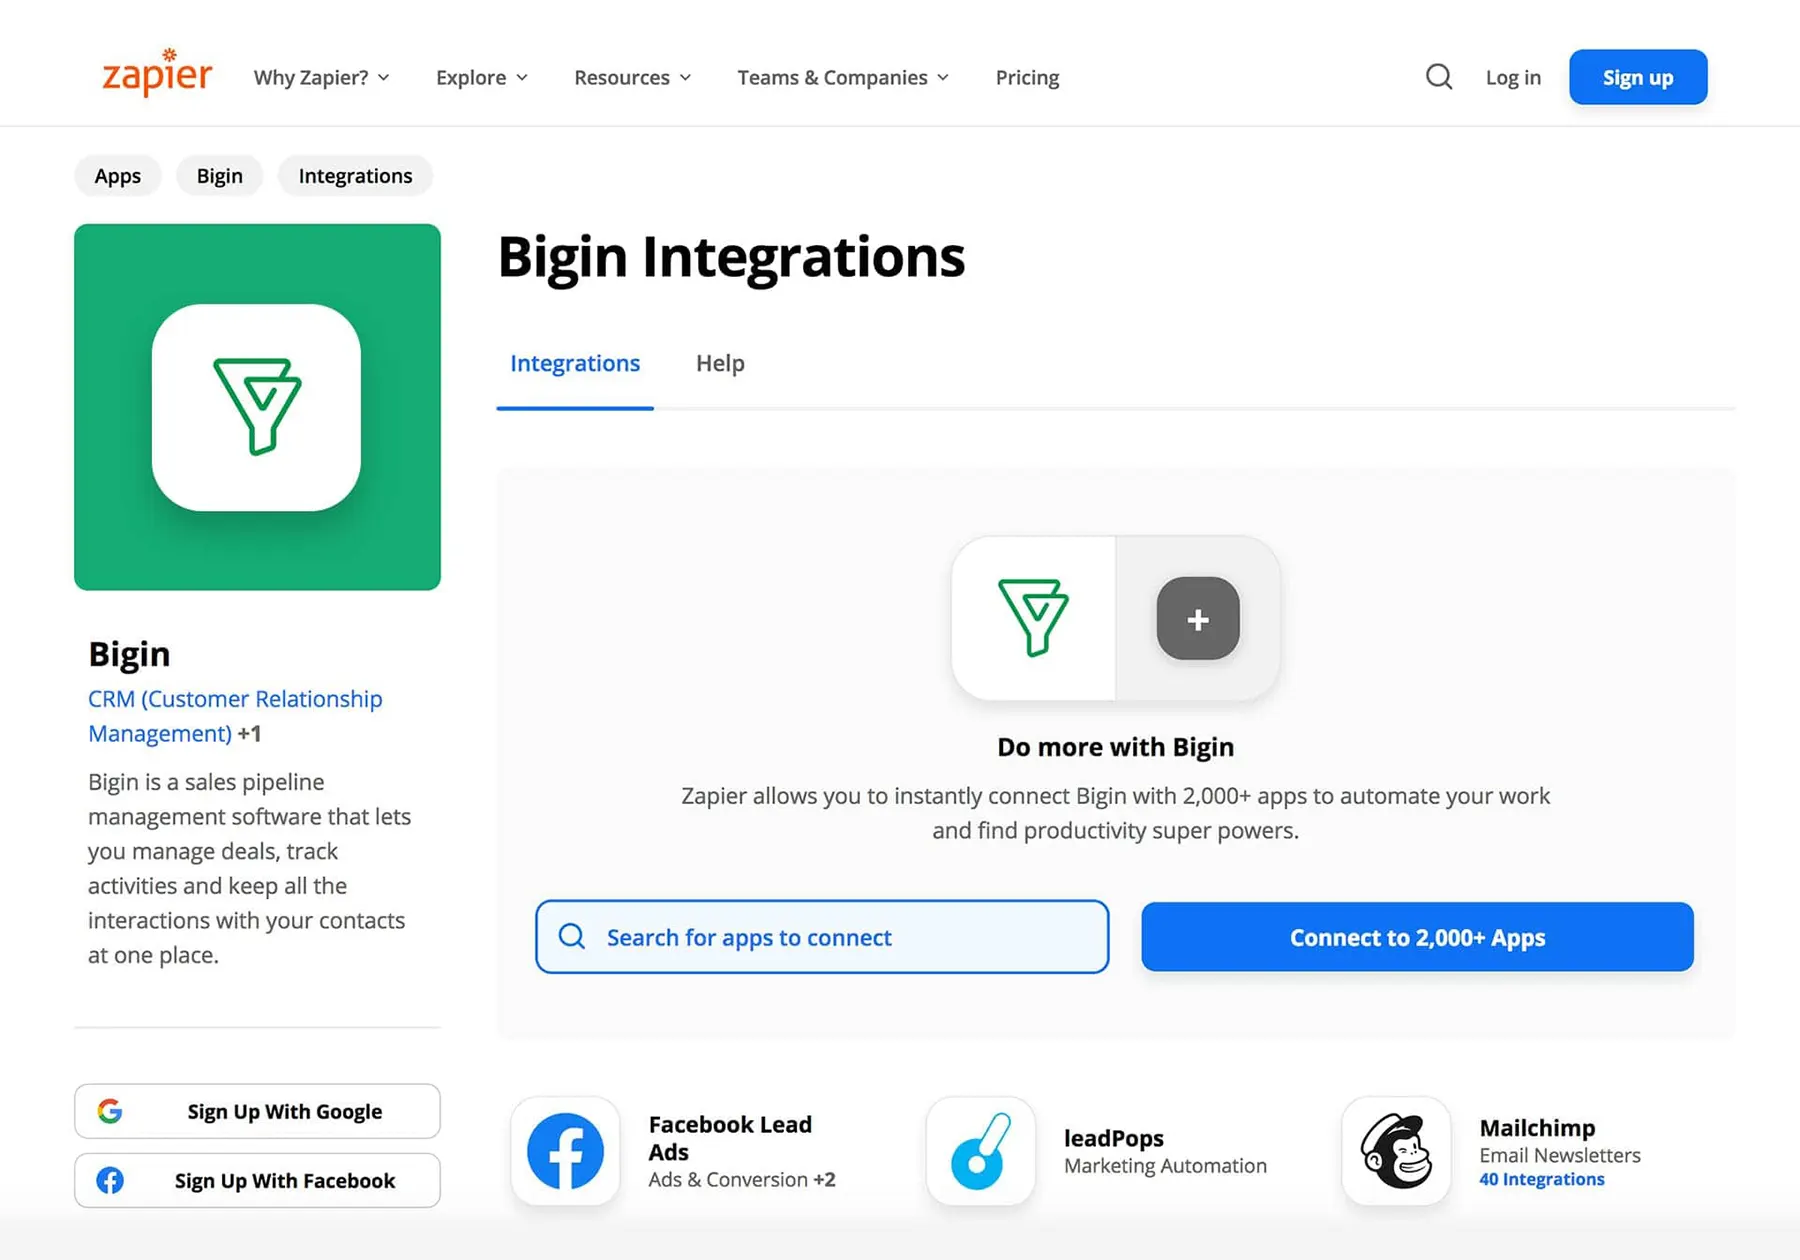 Screenshot depicting Bigin's ability to connect with two thousand other apps using Zapier–Bigin by Zoho CRM.